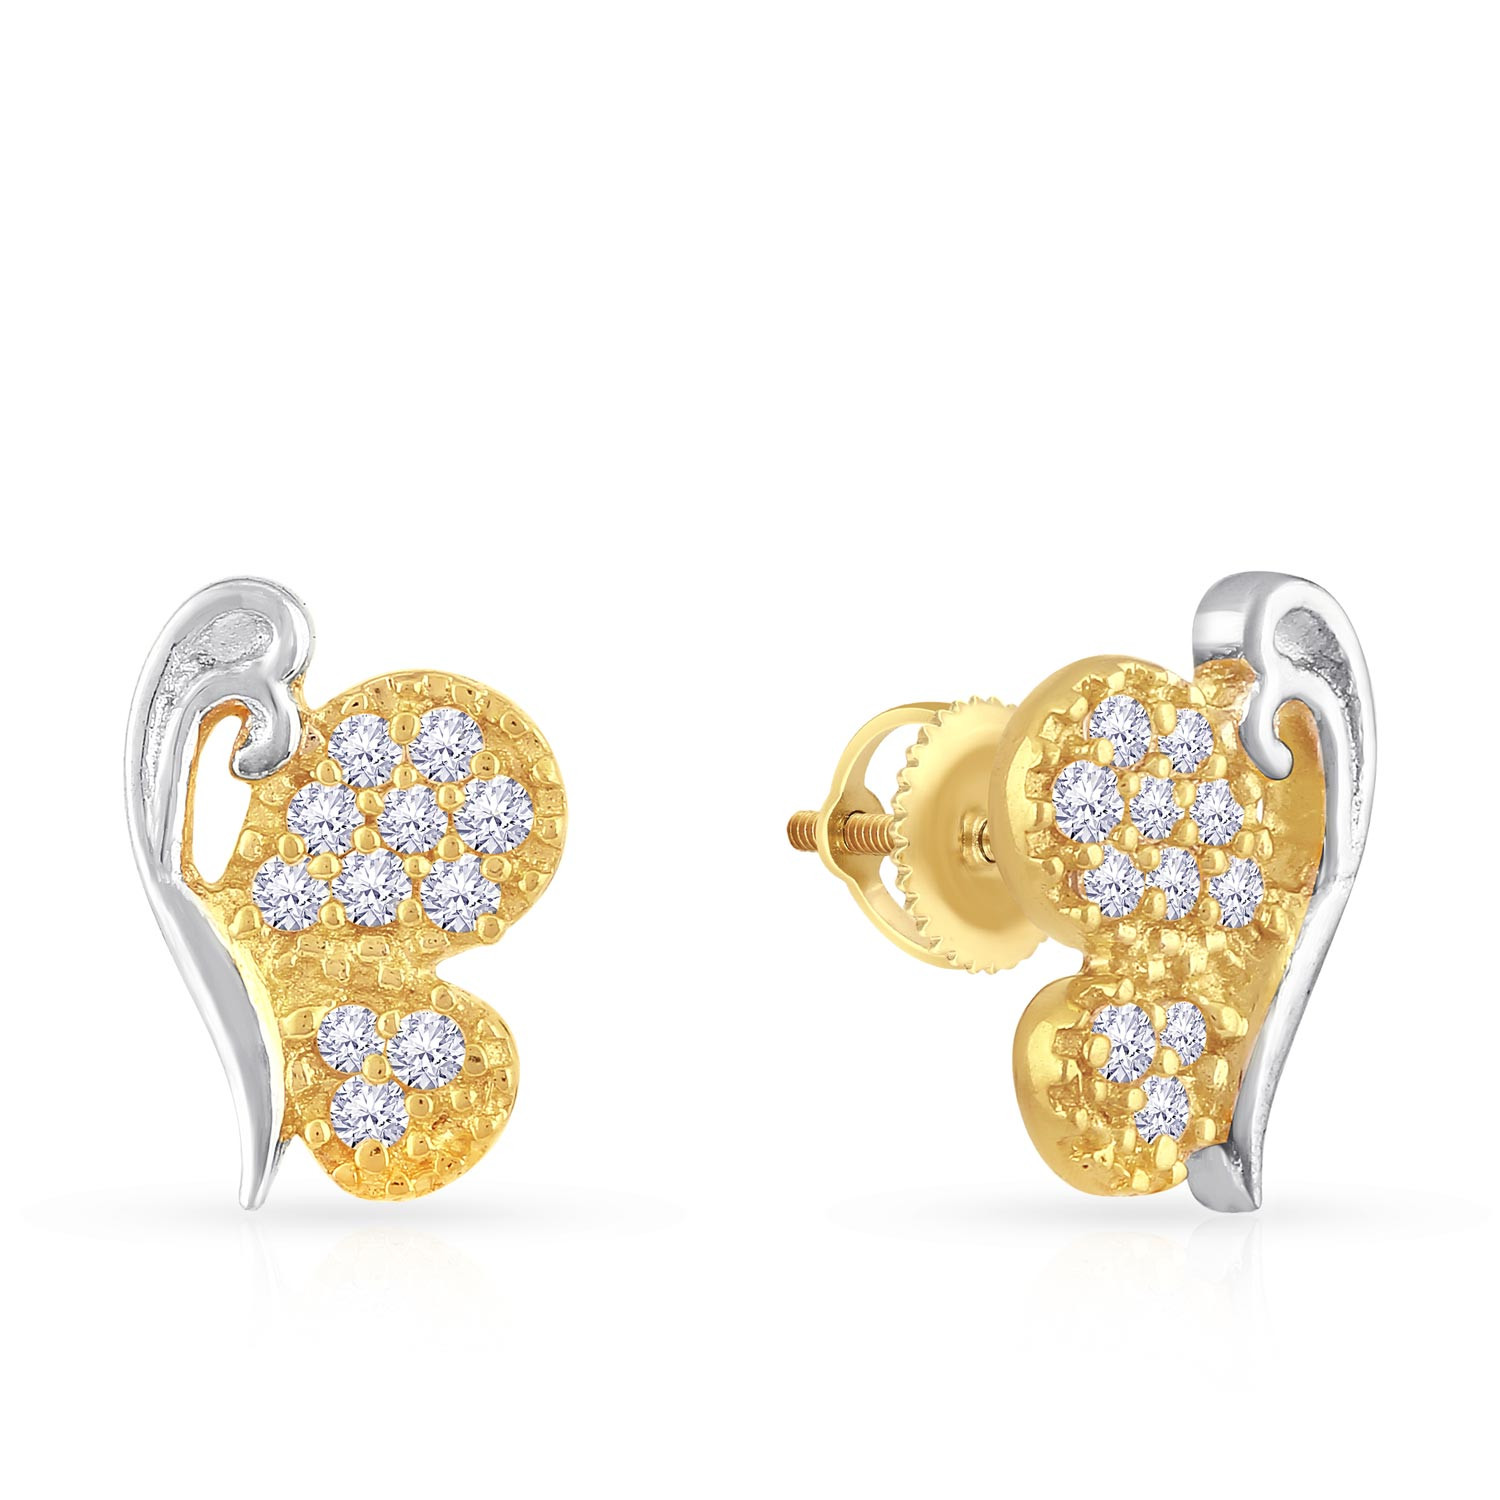 Malabar 22 KT Two Tone Gold Studded Earring EGSGHTYA0048